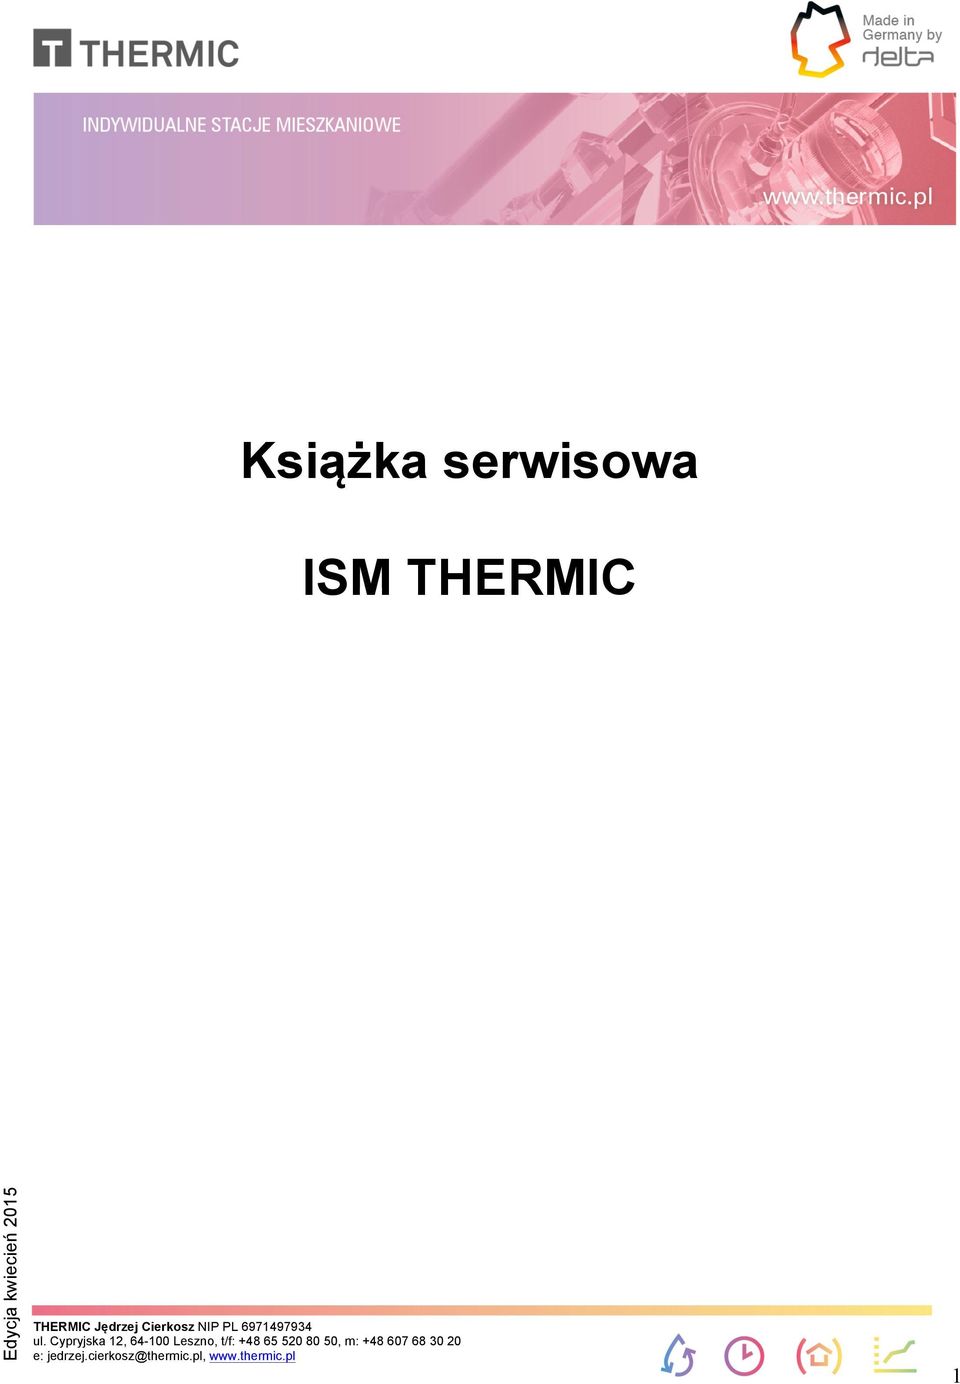 ISM THERMIC